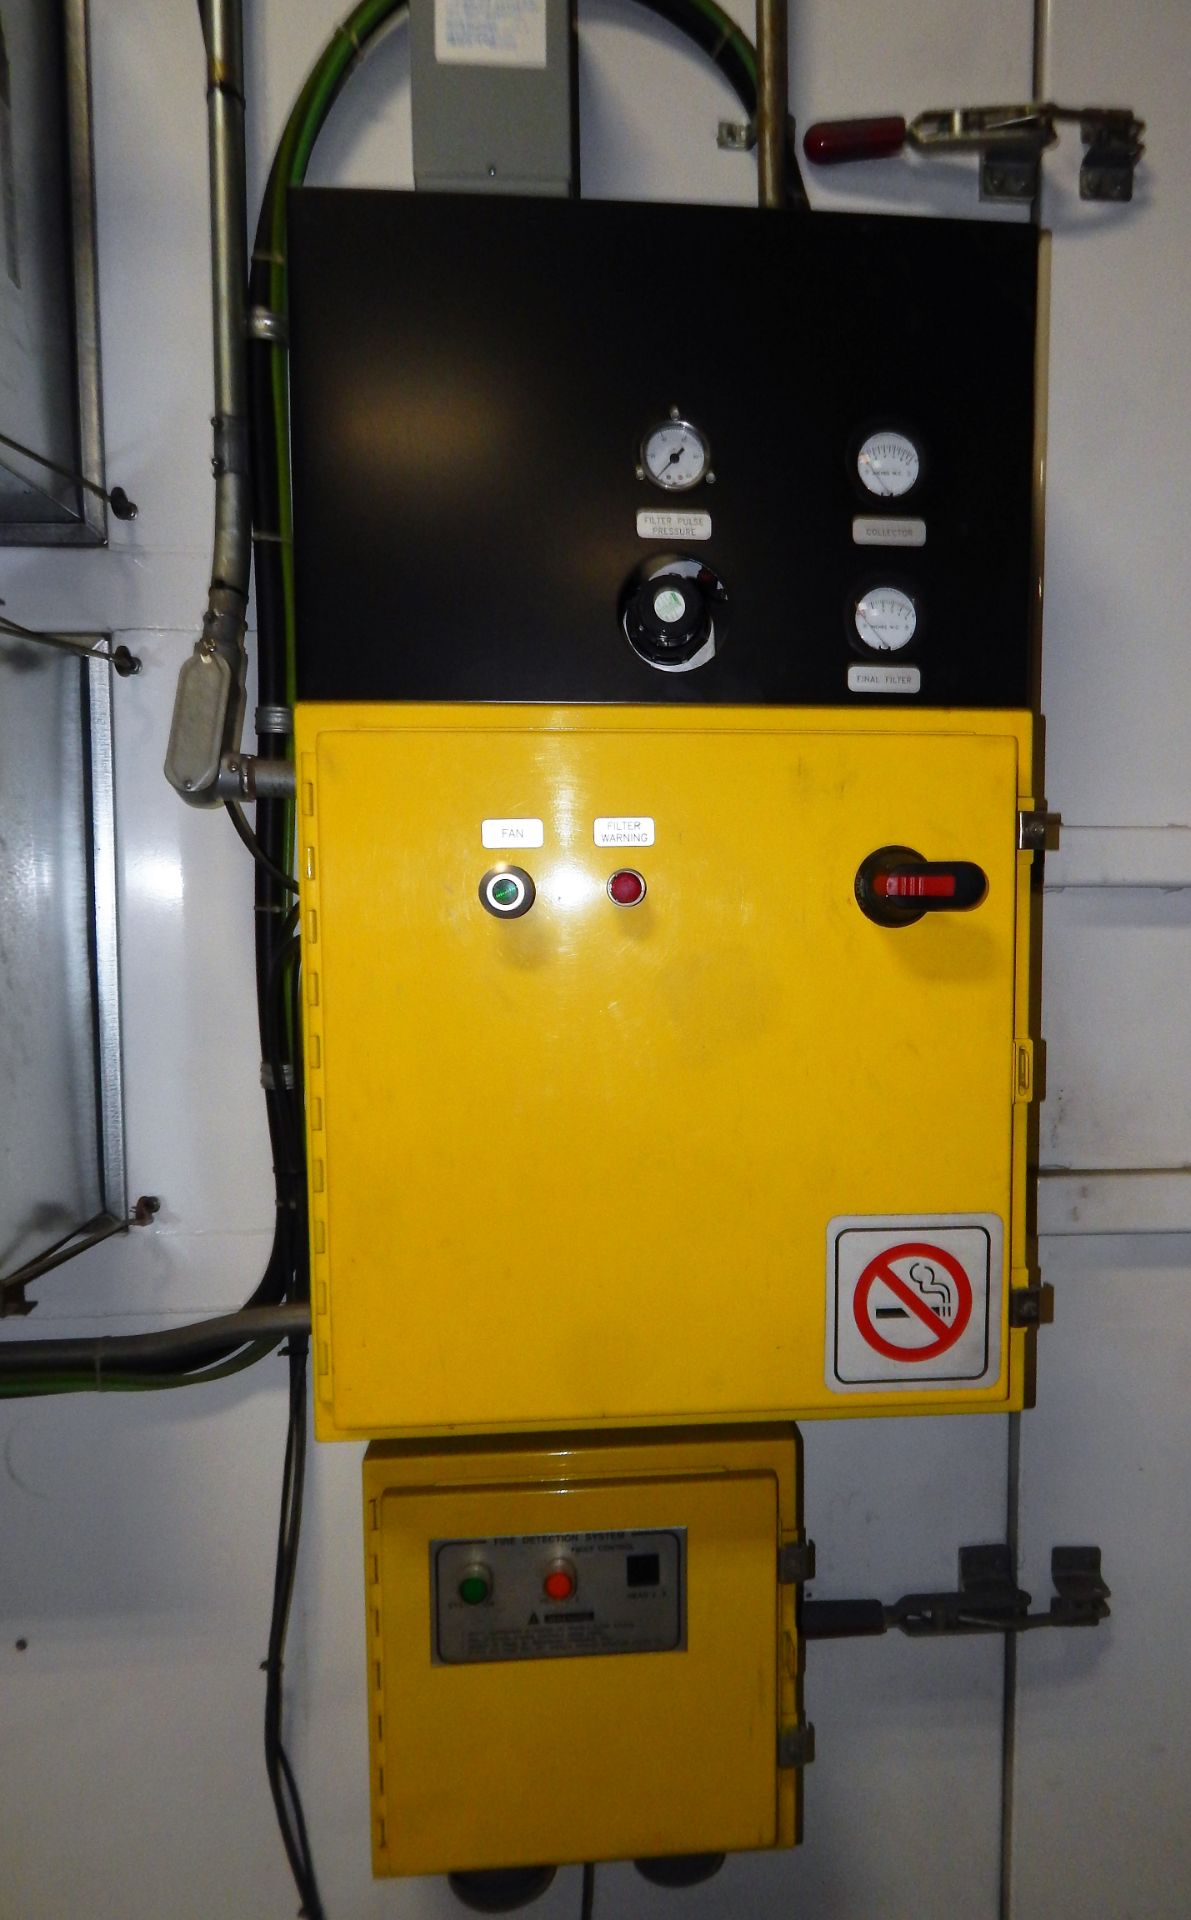 WAGNER POWDER COAT PAINT SYSTEM, 6 HEAD SYSTEM, CONTROL PANEL EPG 2007 PASS THROUGH TYPE - Image 6 of 8